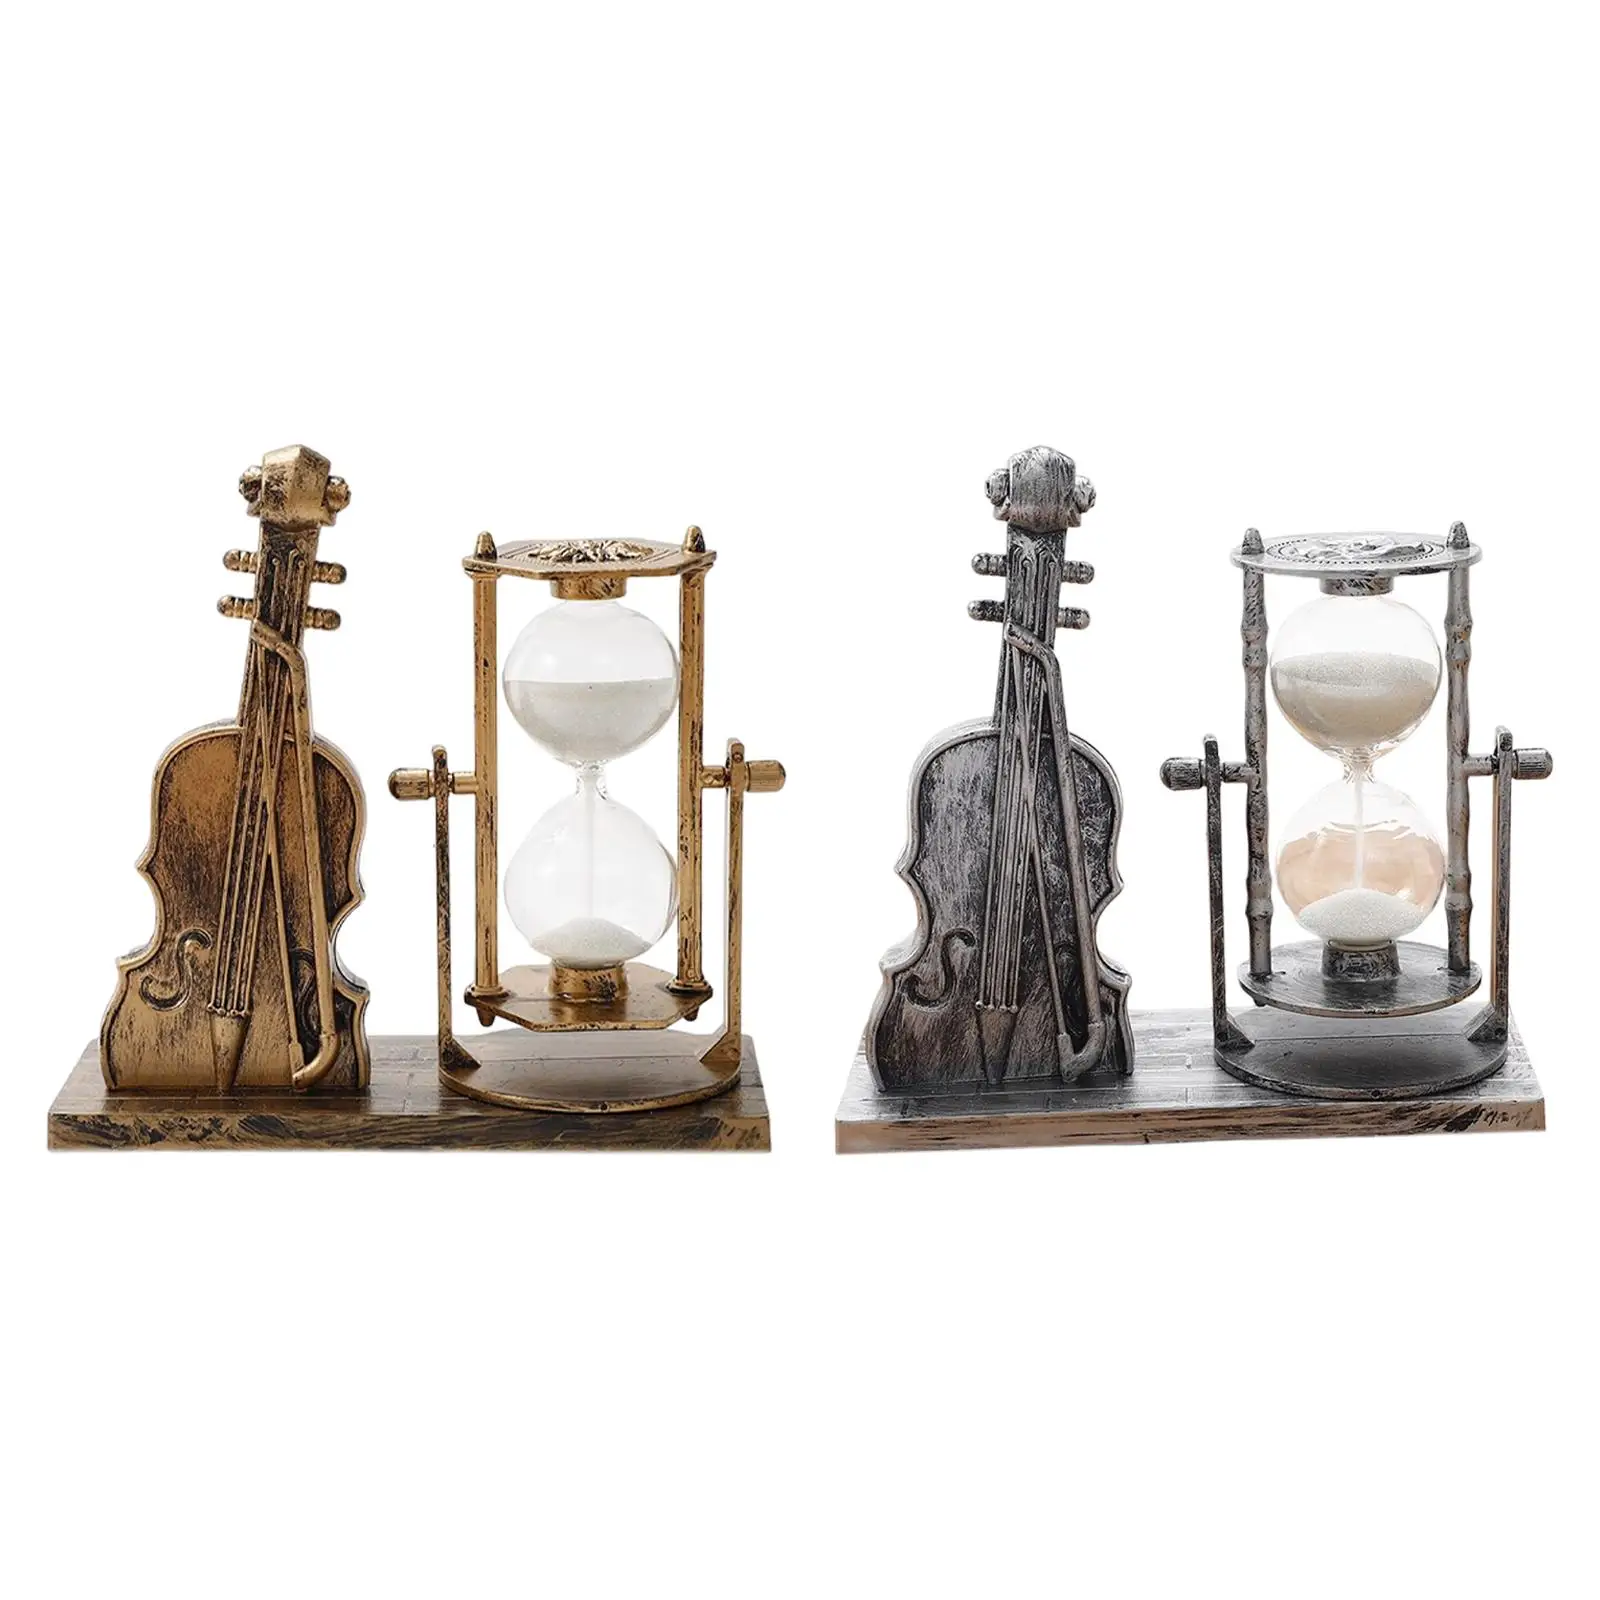 Hourglass Violin Sculpture Vintage Sand Clock Decorative Exquisite for Table Centerpieces Home Office Party Birthday Gift